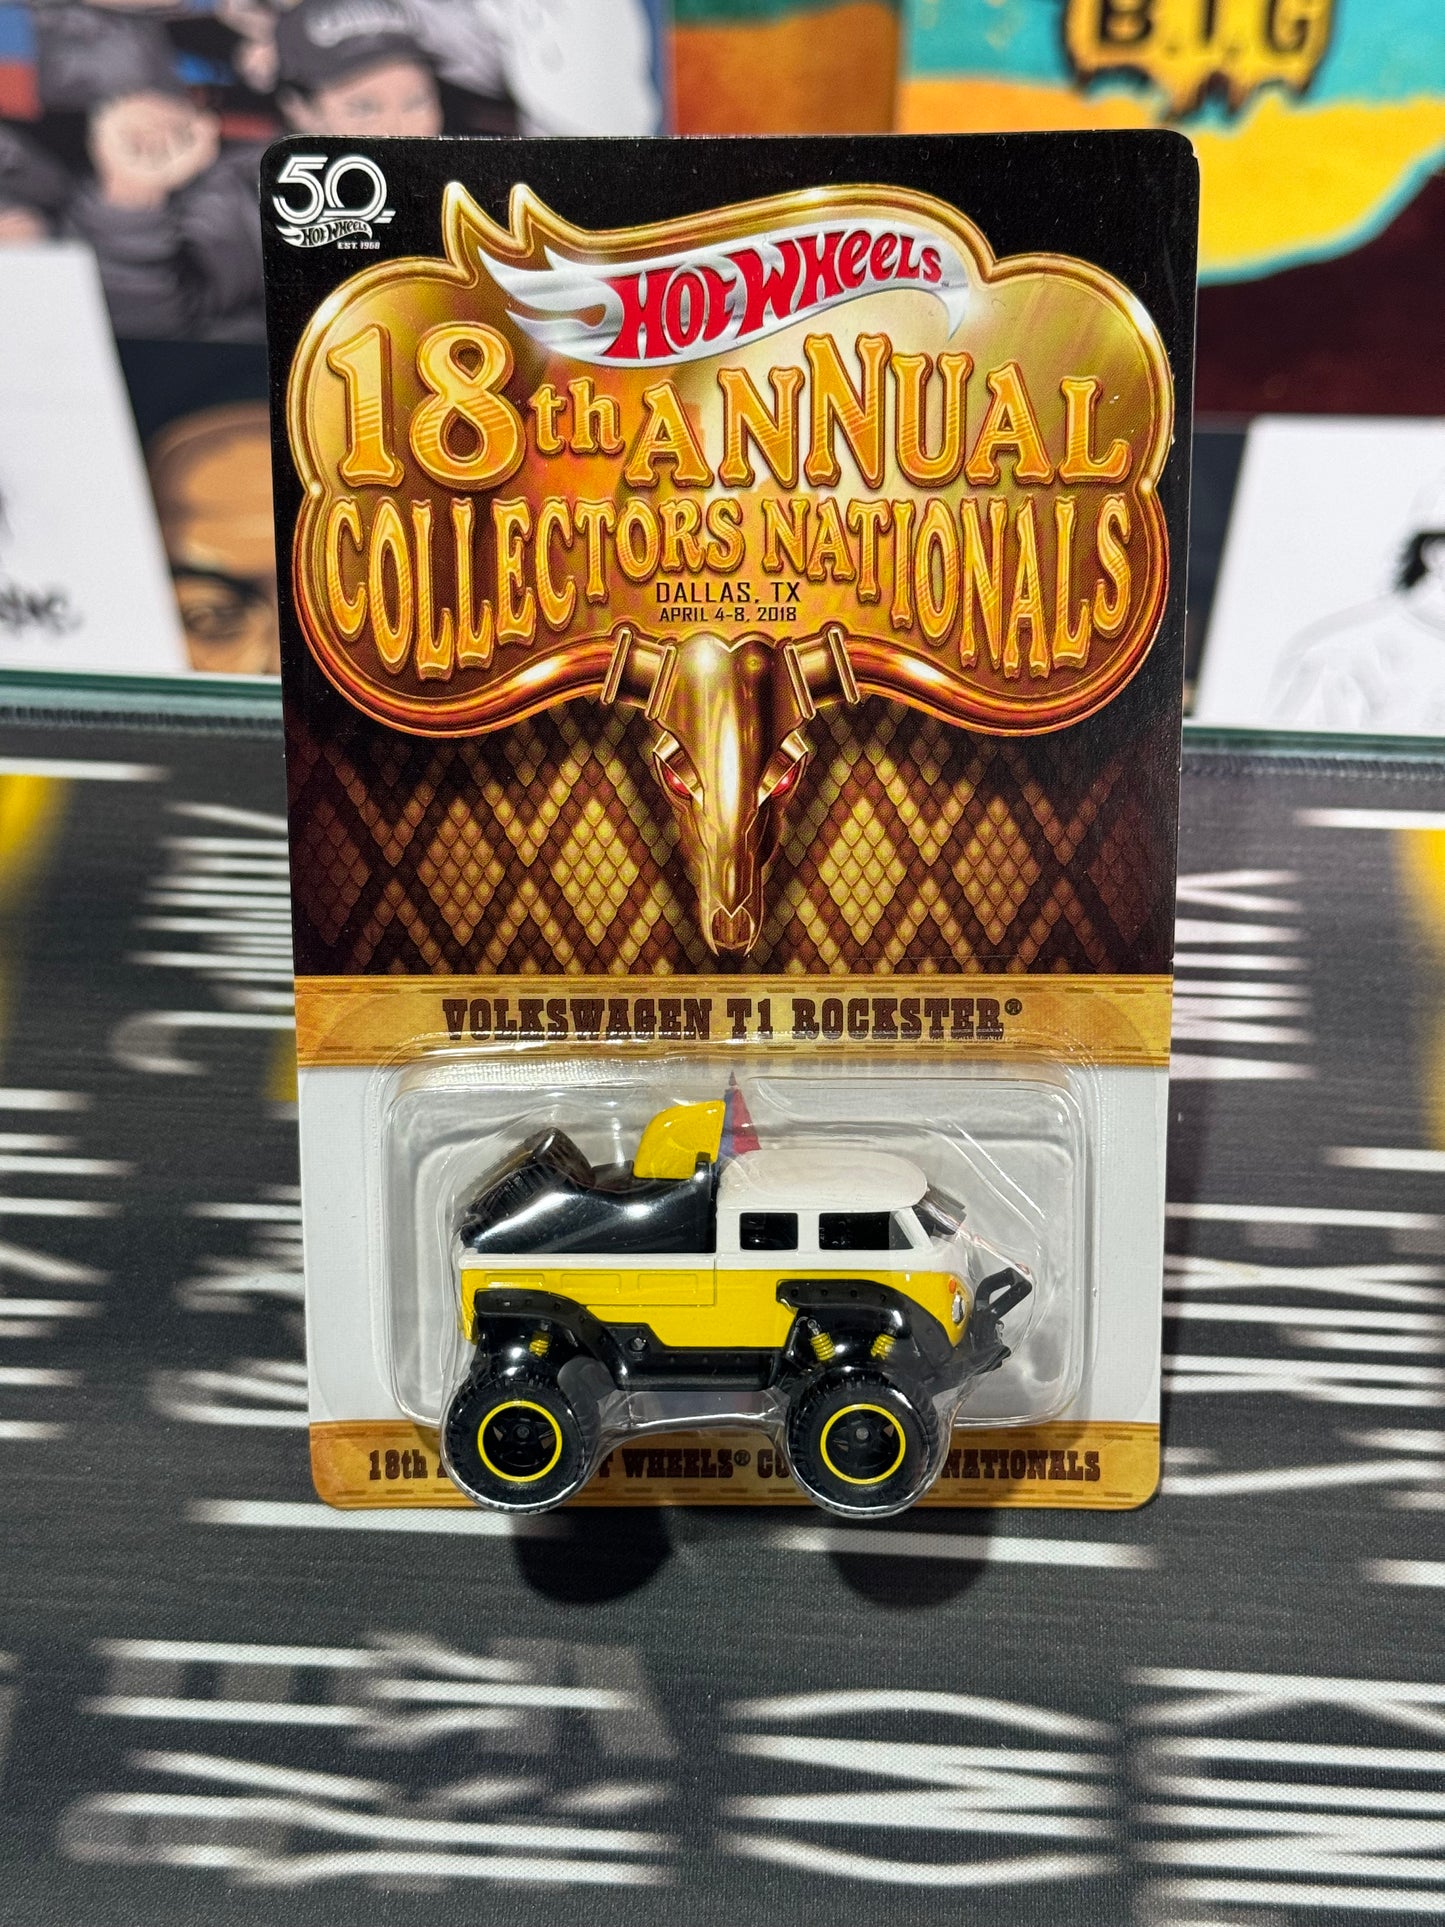 Hot Wheels 18th Annual Collectors Convention Volkswagen T1 Rockster